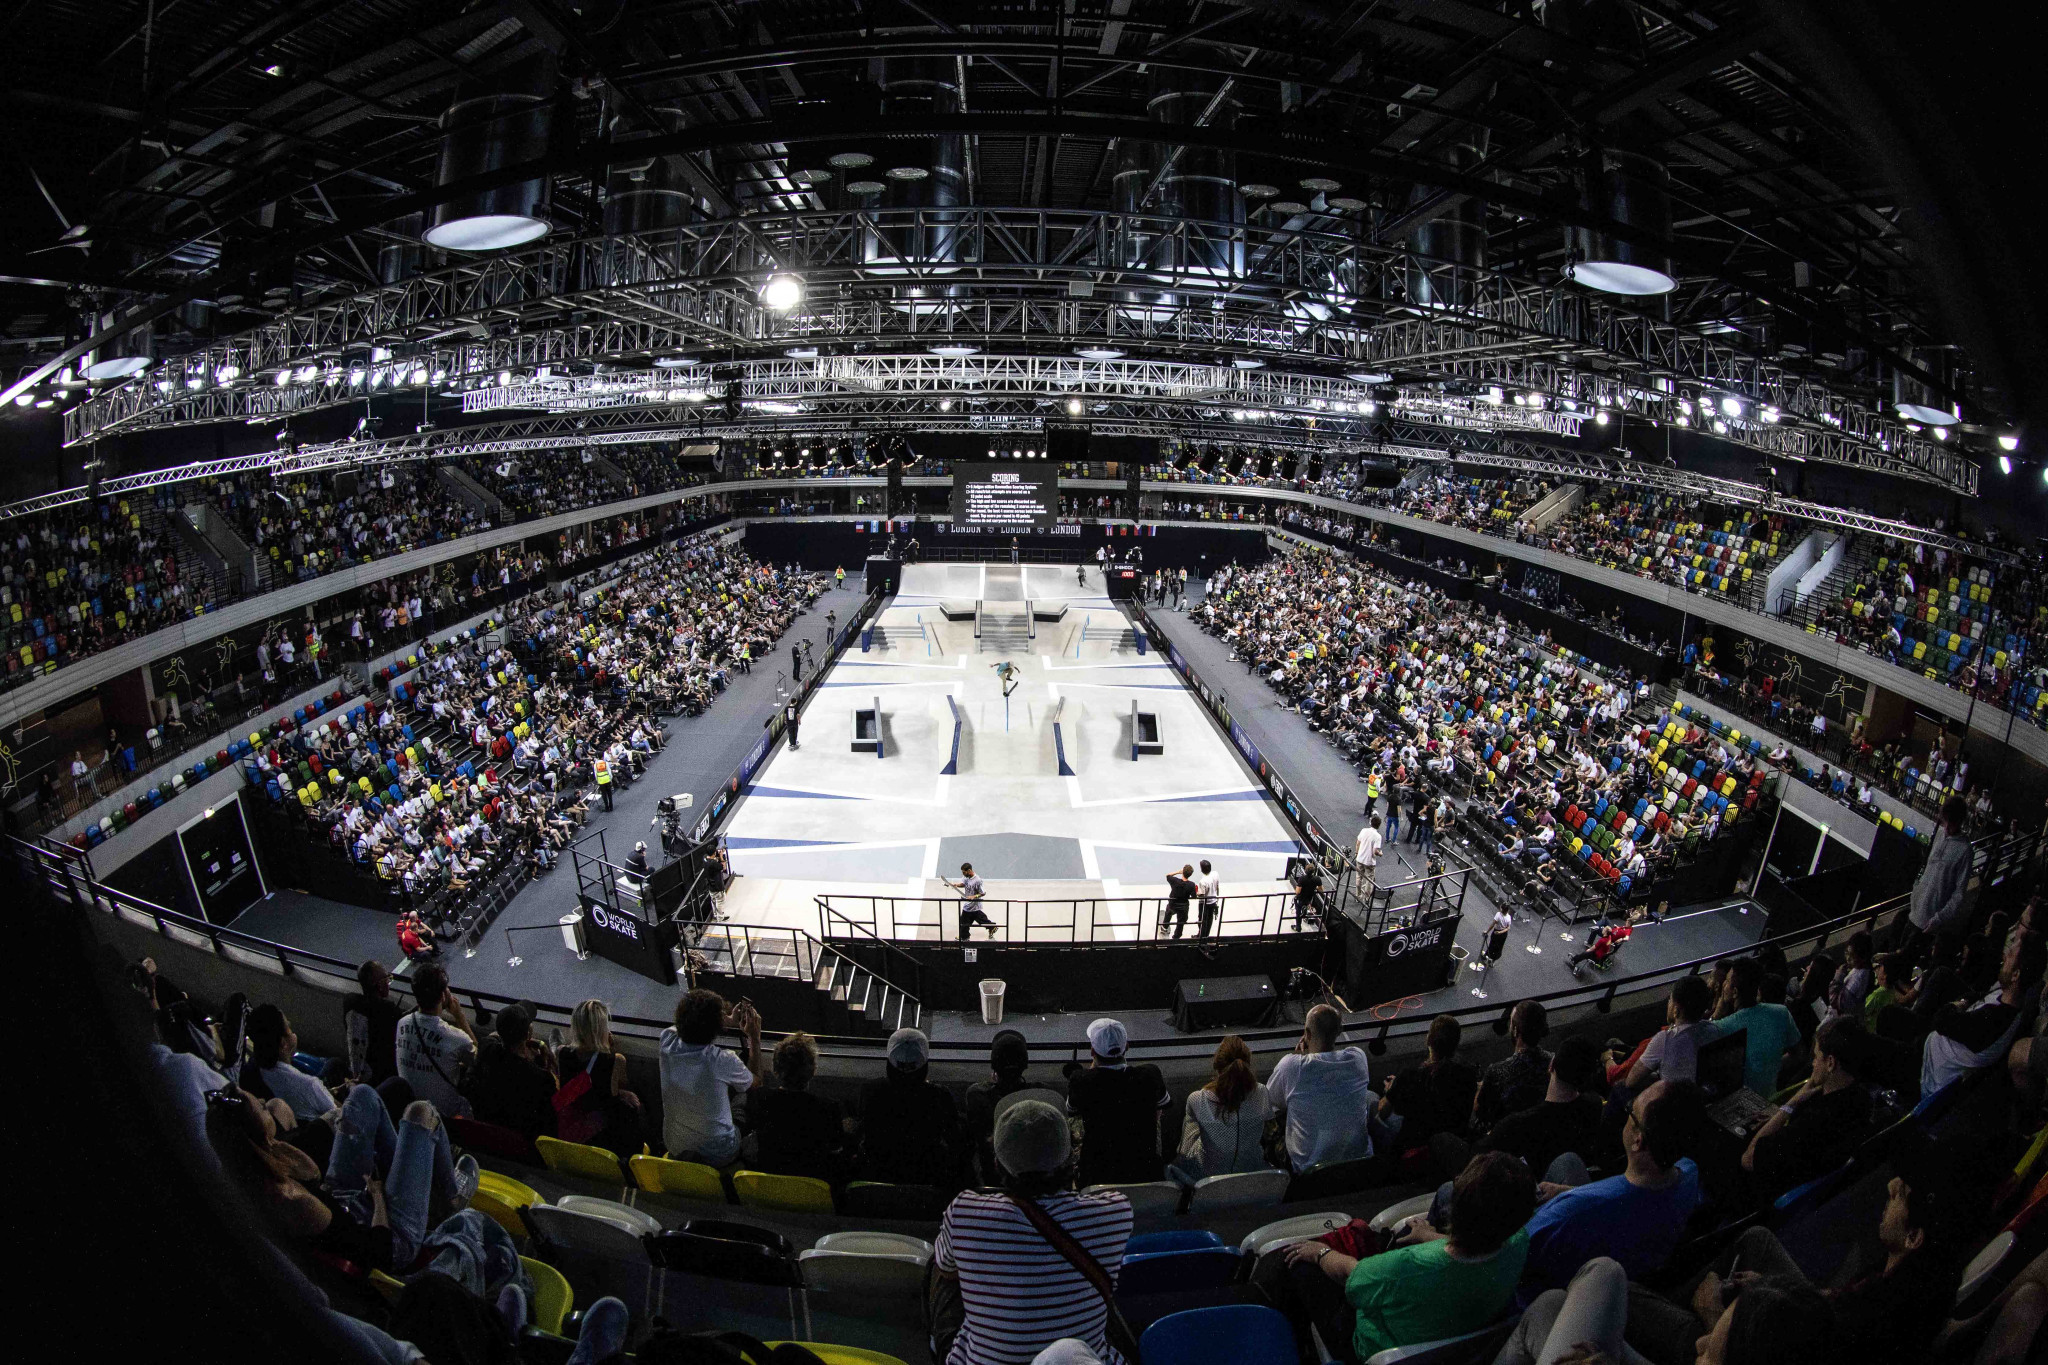 The Los Angeles event is following a competition in London's Copper Box Arena ©StreetLeagueSkateboarding